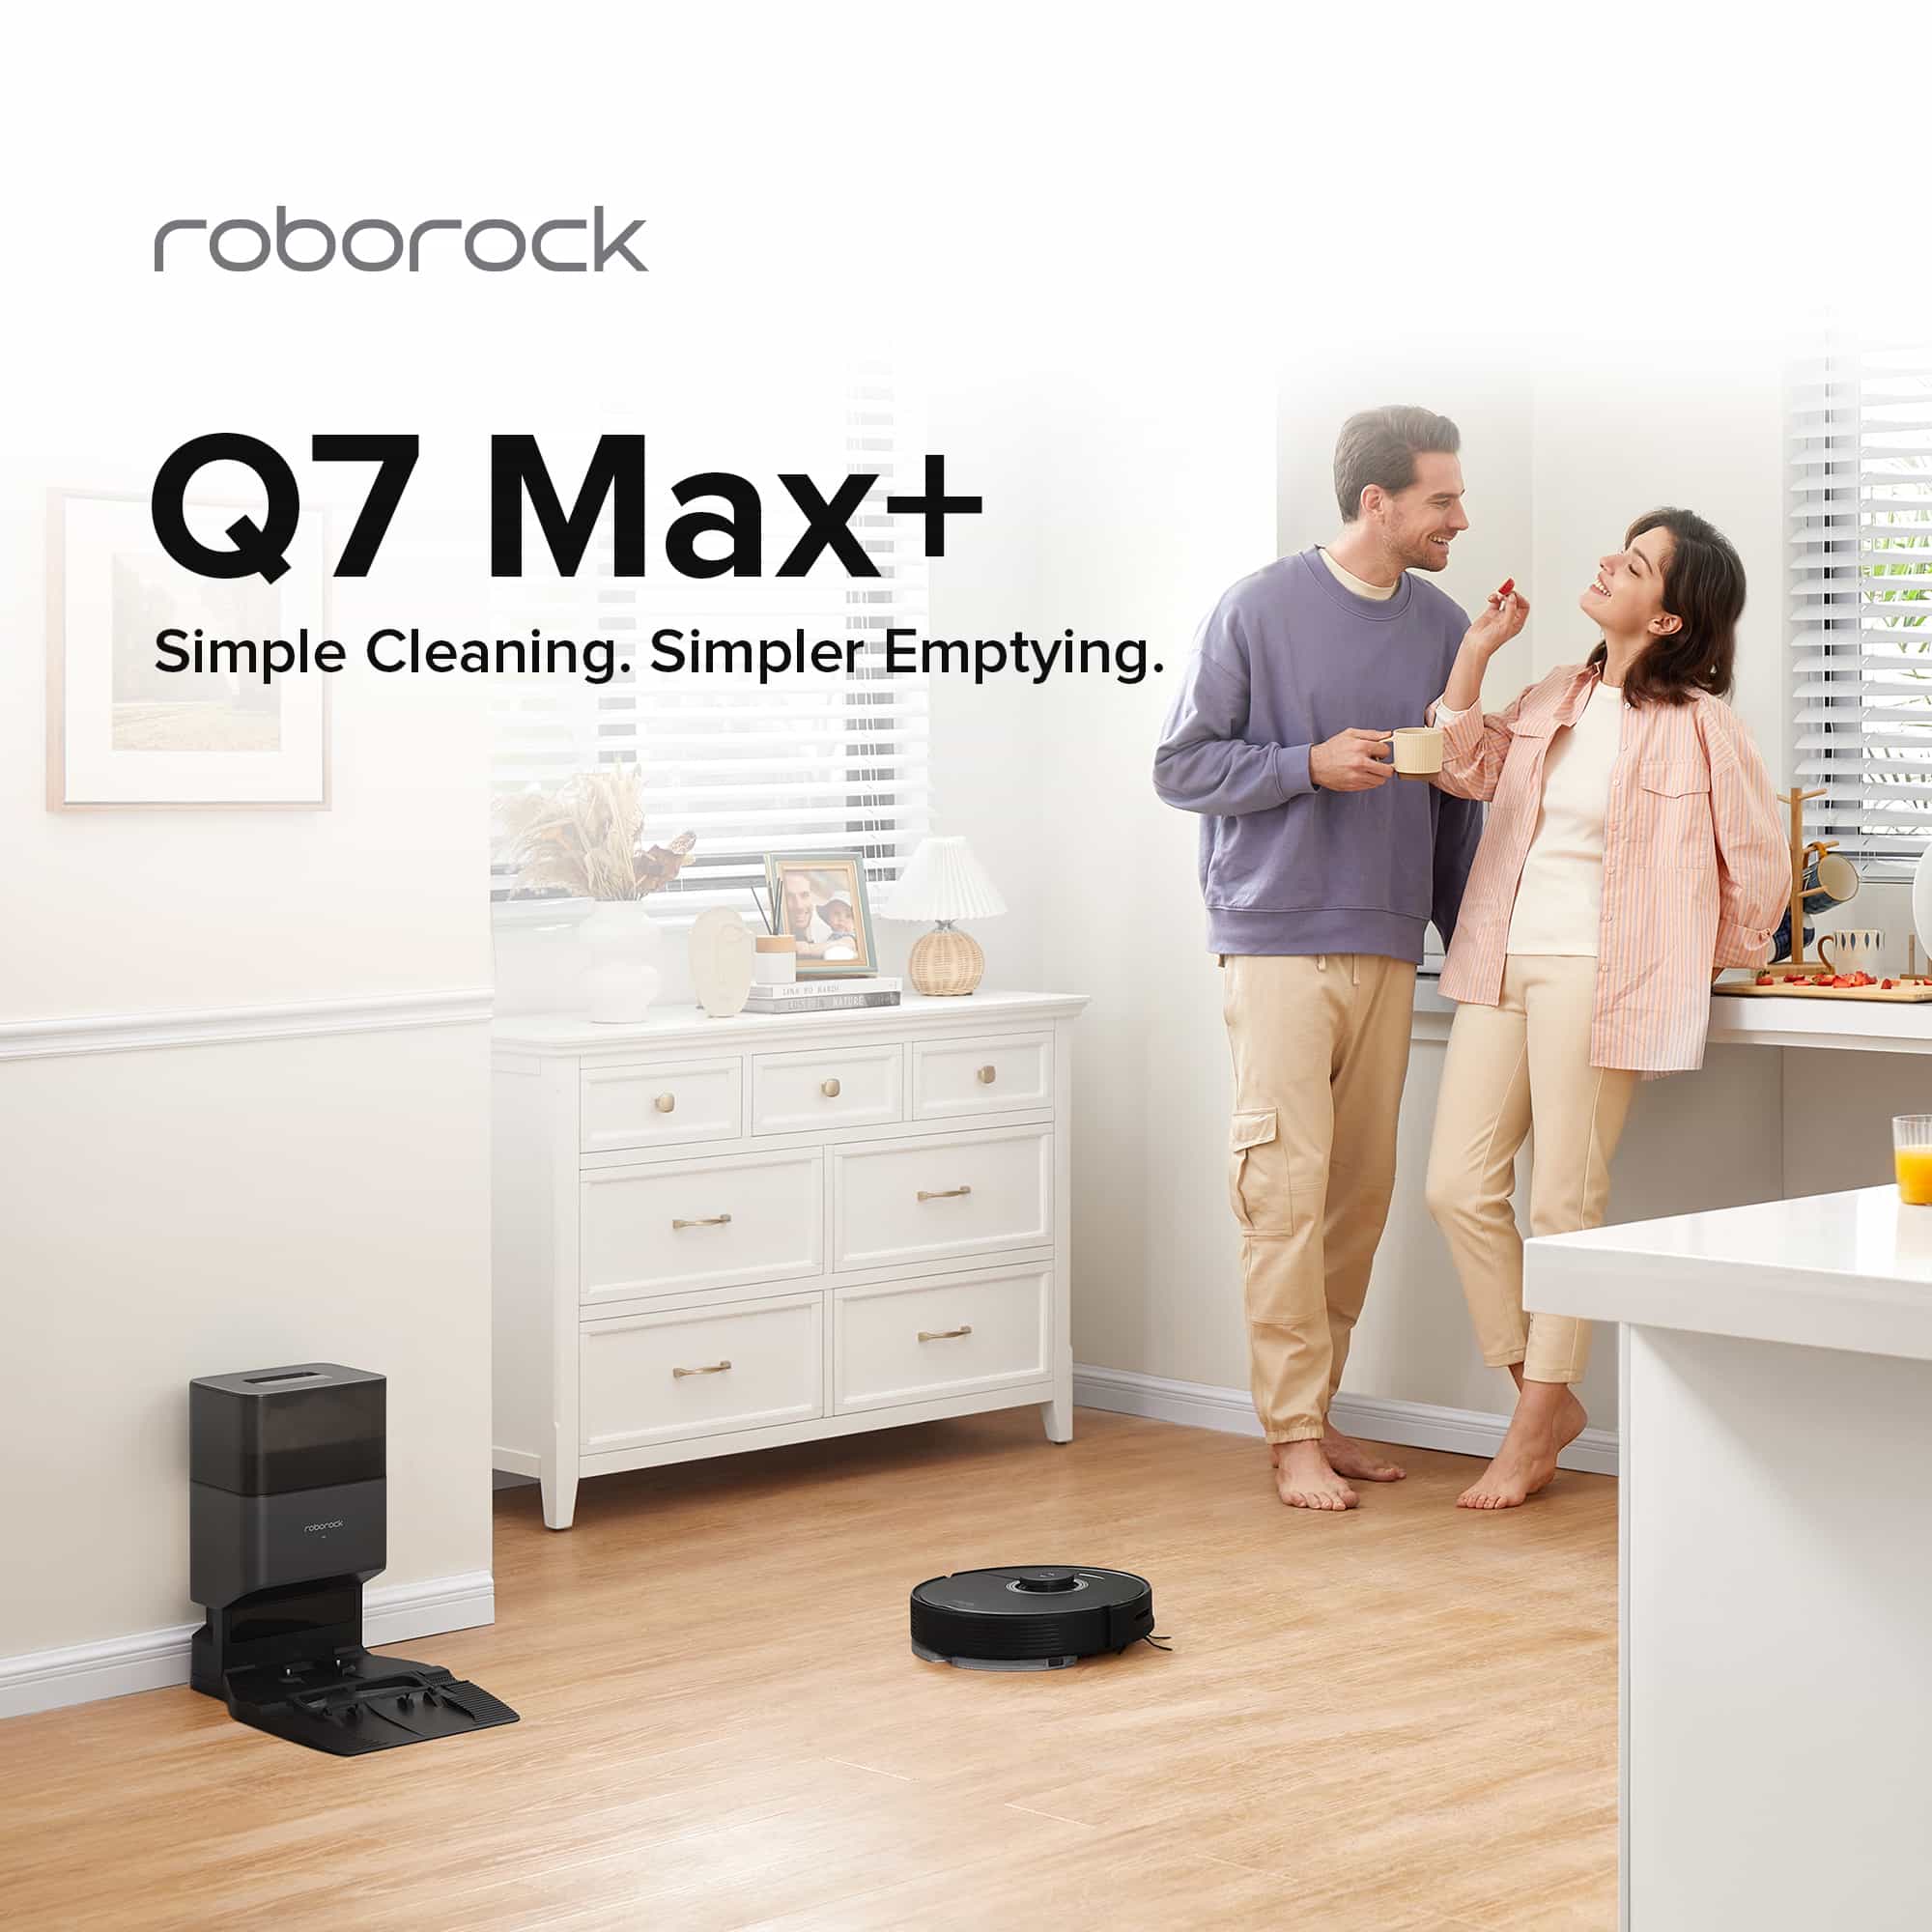 Roborock Q7 Max Plus - features and ✨ specifications